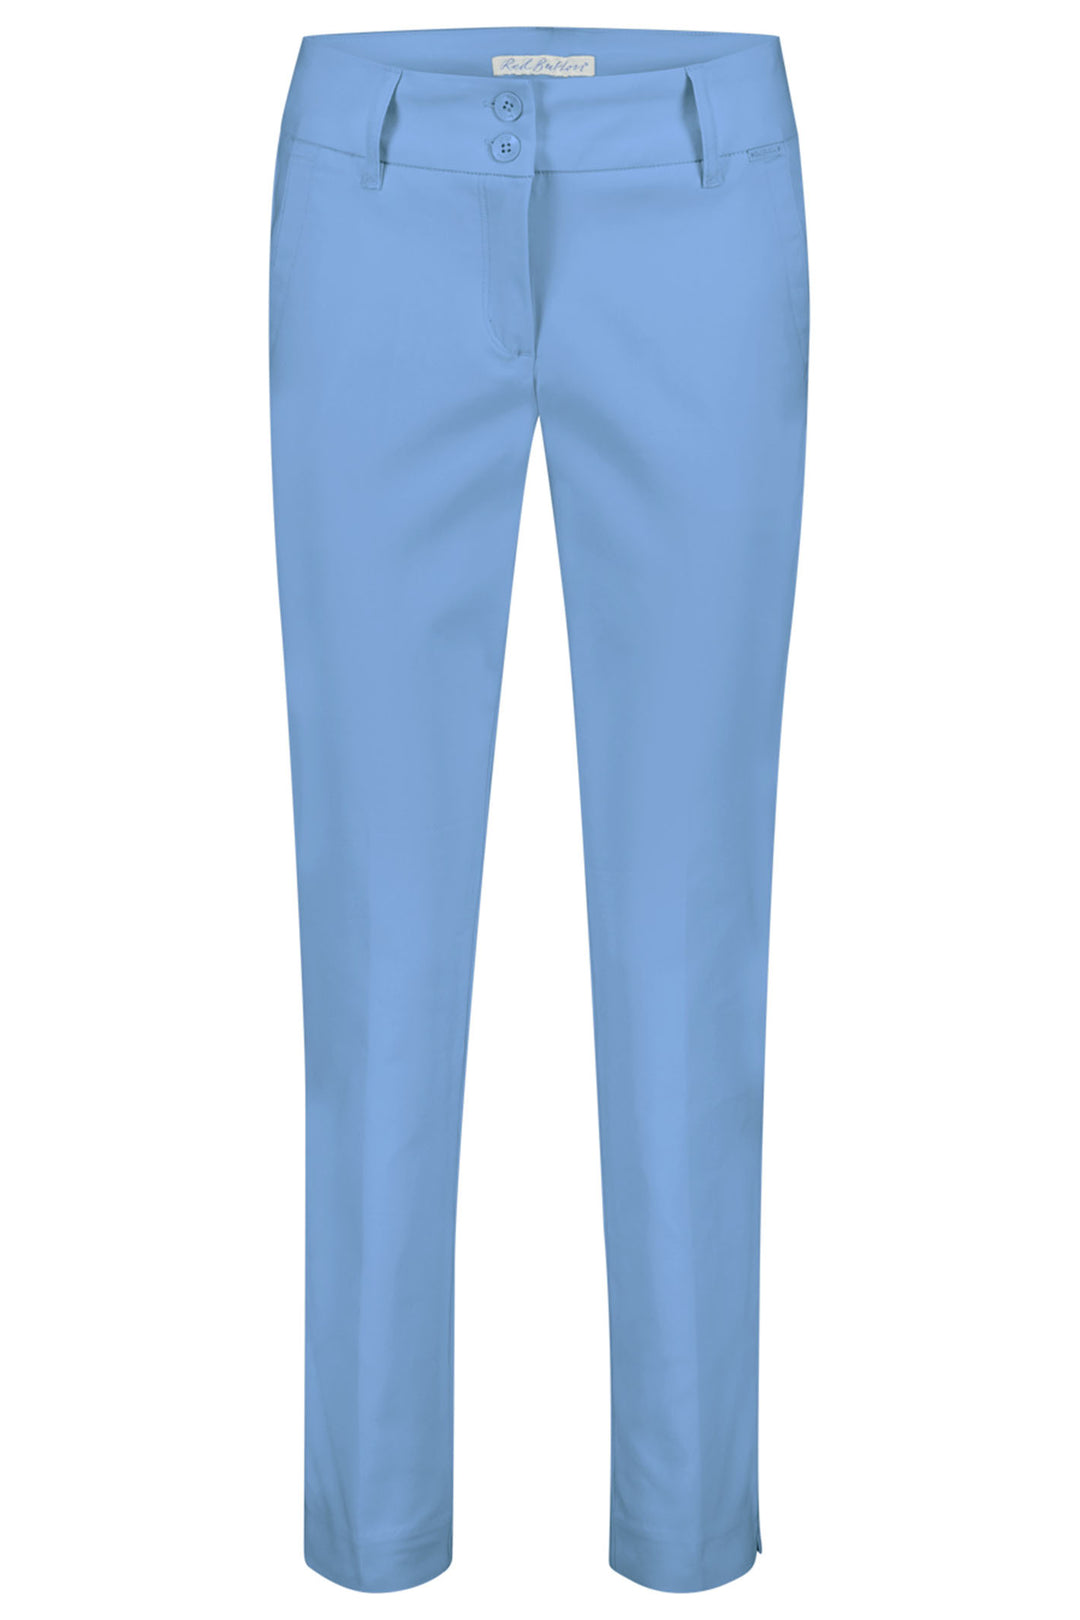 Red Button SRB4205 Diana Crop Mid Blue Smart Tapered Trousers - Dotique